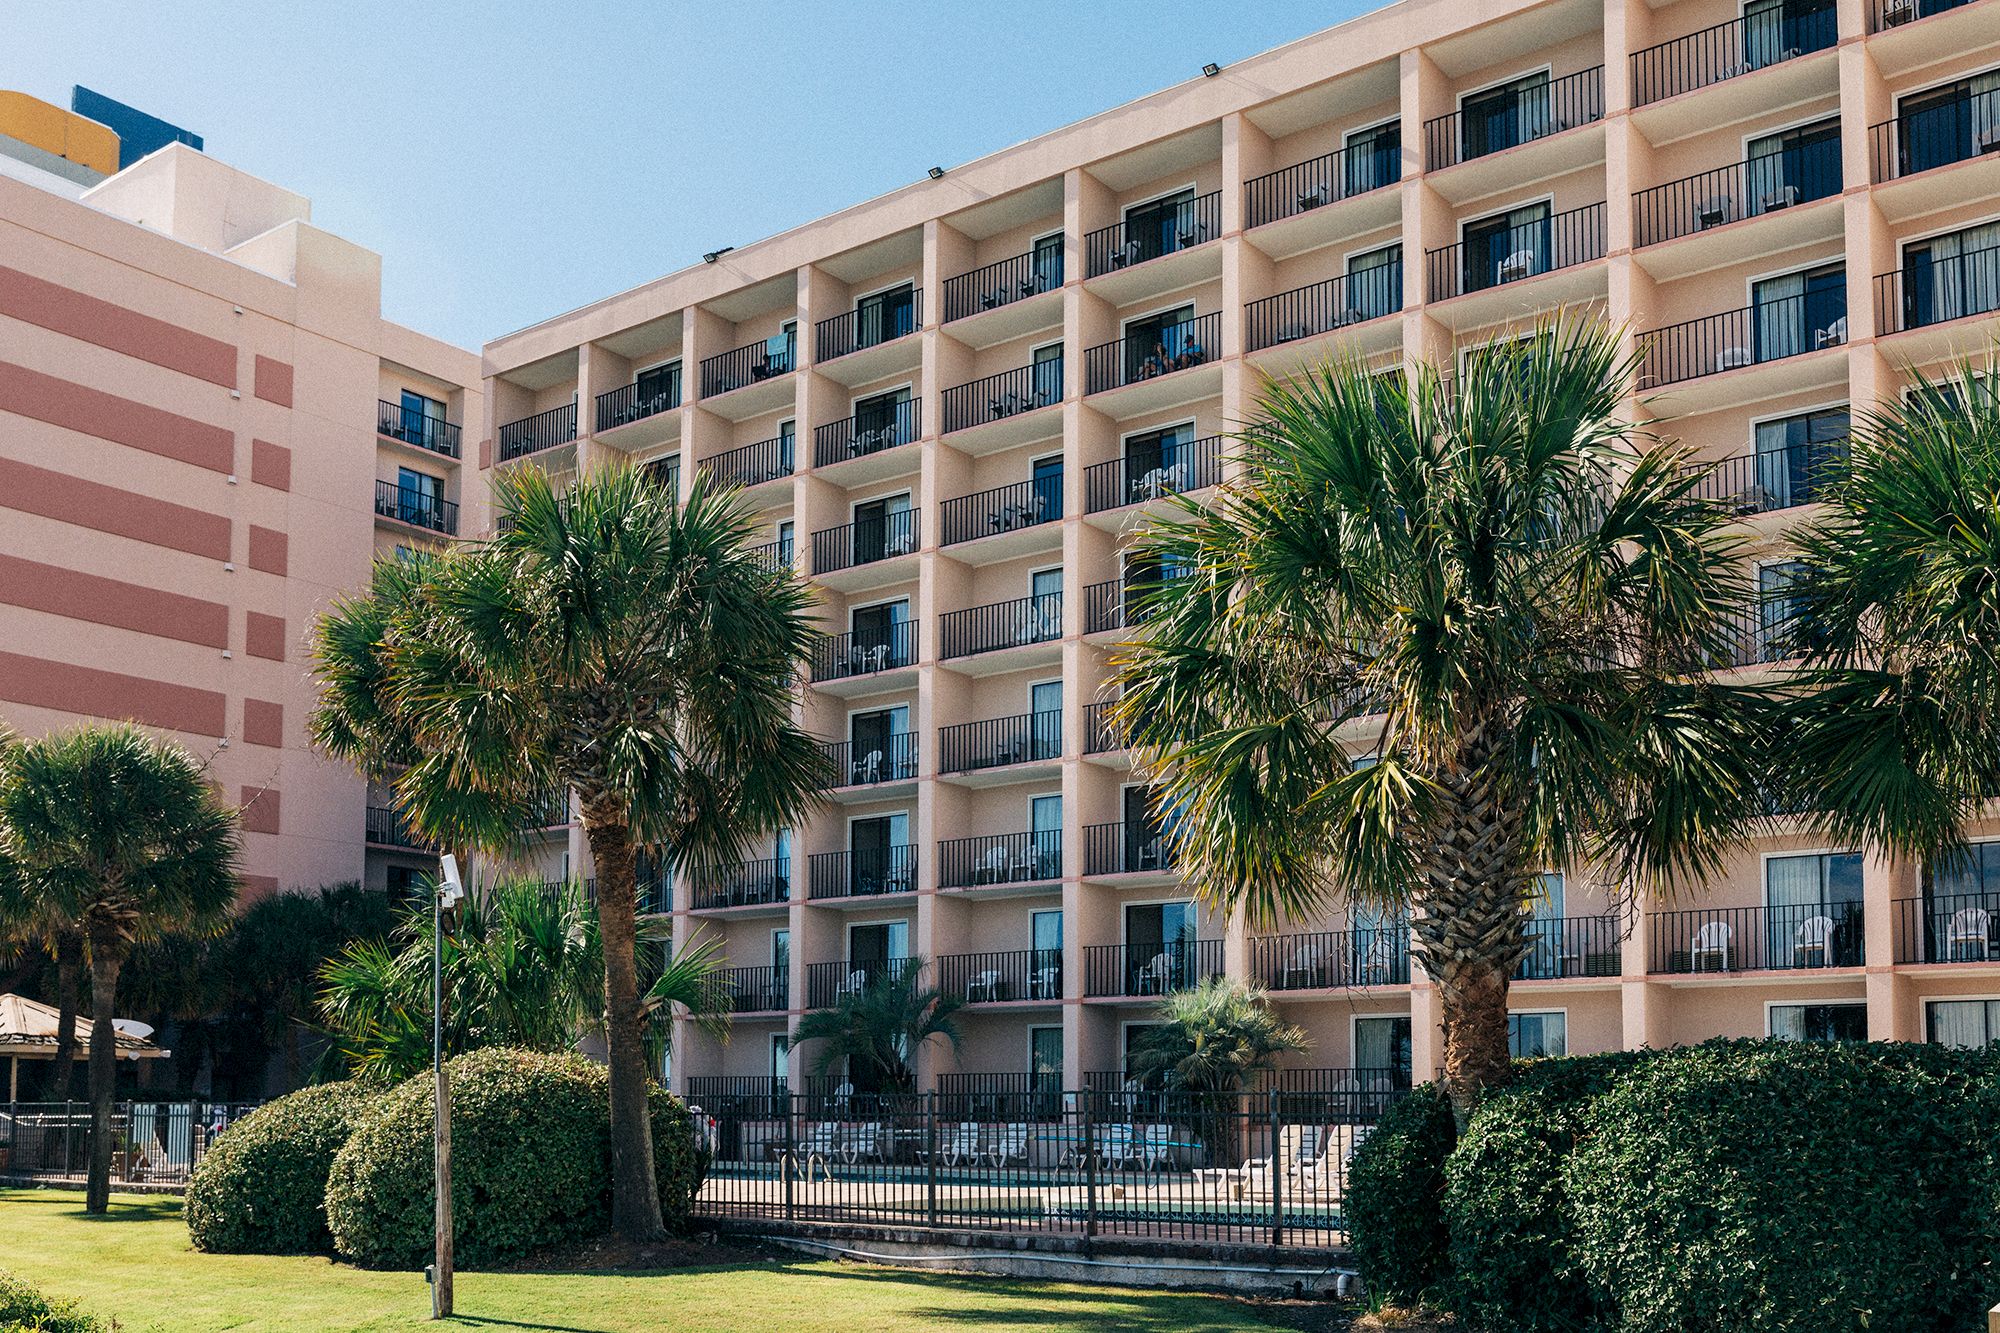 The image shows a multi-story hotel with balconies, palm trees, and a fenced area, possibly for a pool, in the foreground.